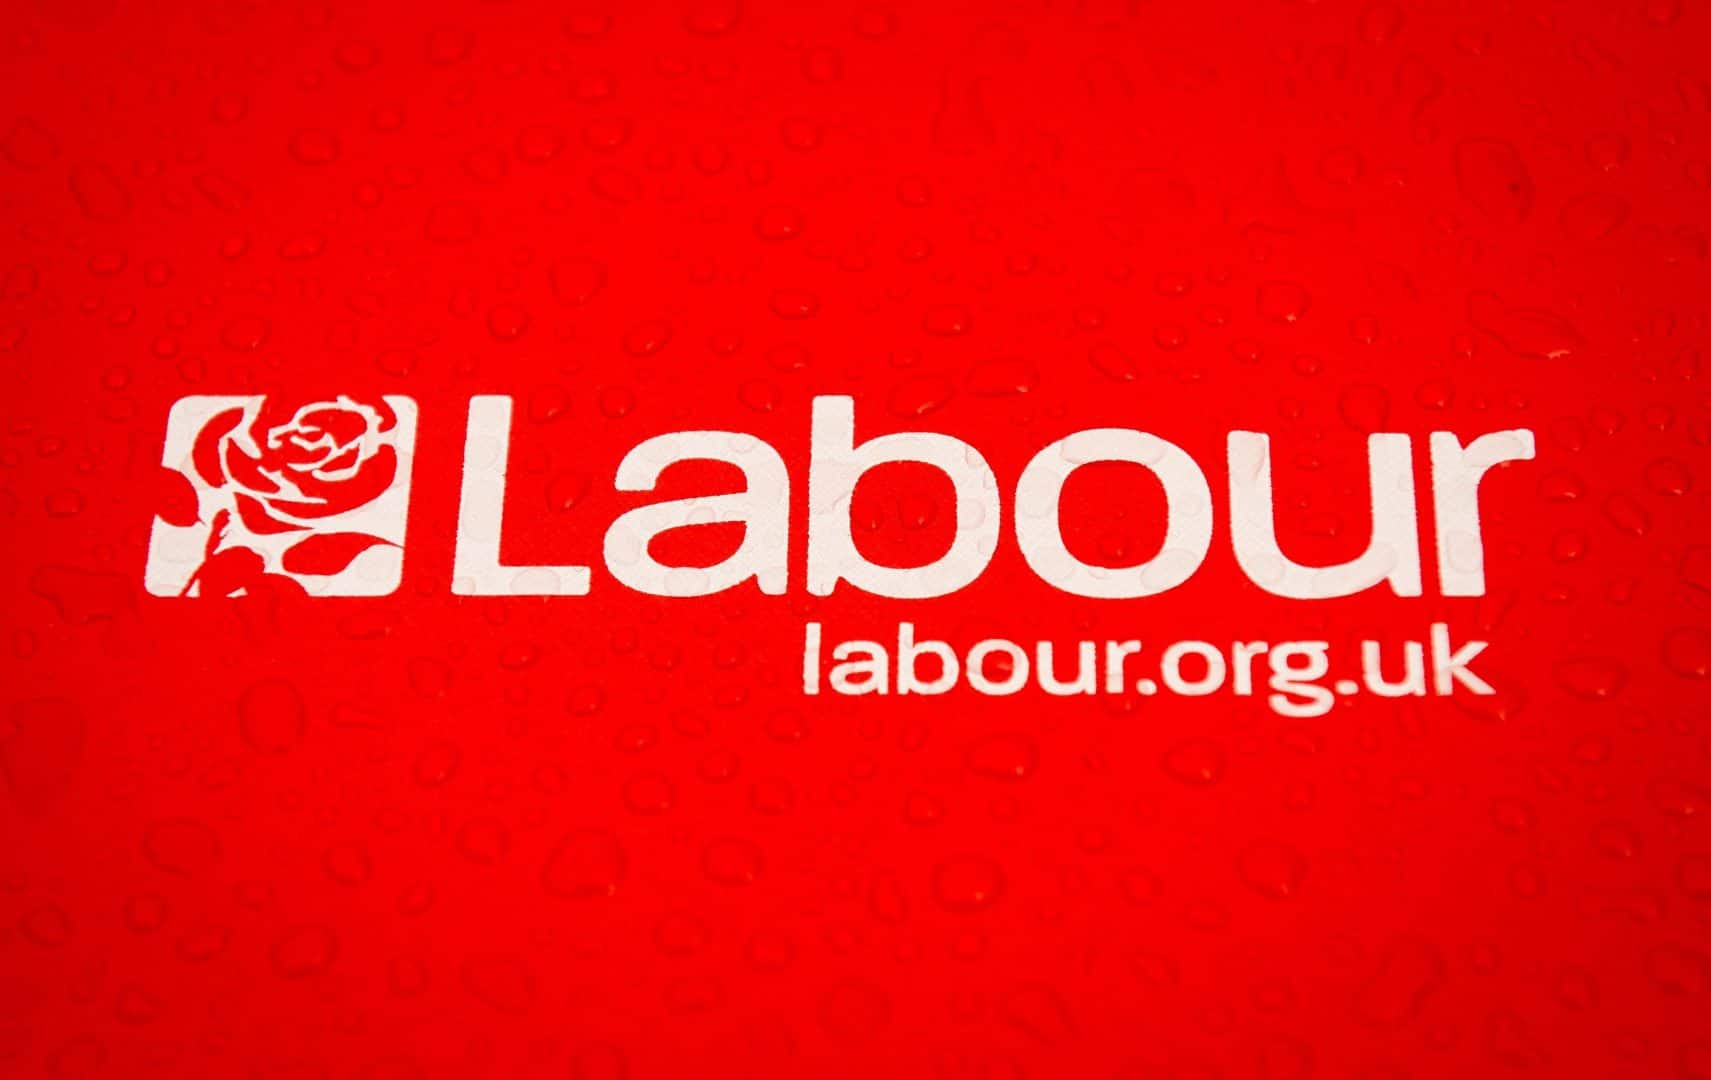 Who will be the next Labour leader?